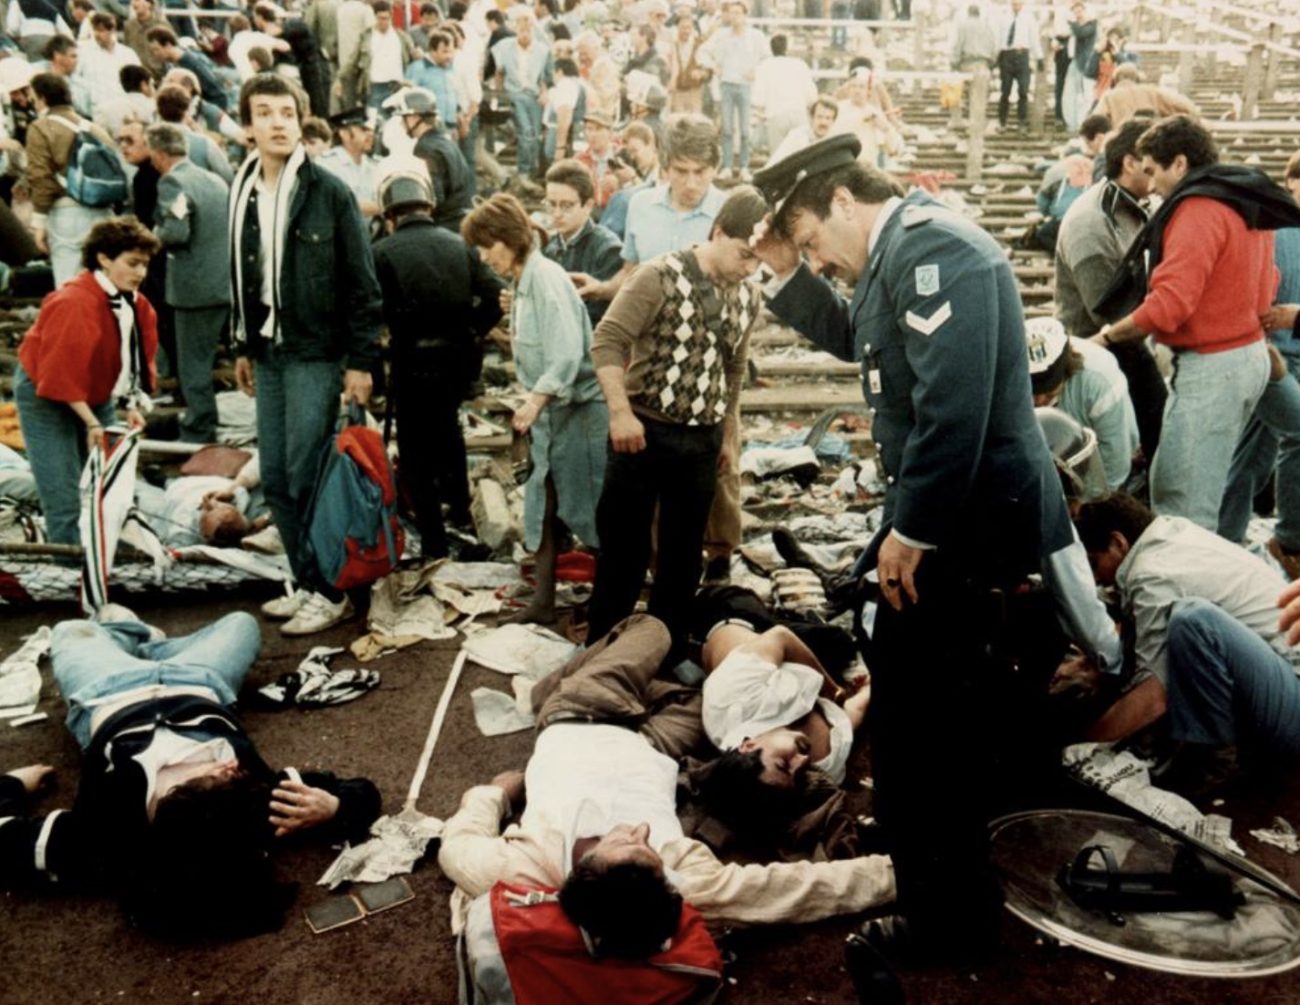 May 29, 1985, ahead the European Cup Final at the Heysel stadium in Brussels, Liverpool hooligans pressed Juventus supporters against the stands. 39 people died and 600 got injured. RCS photo